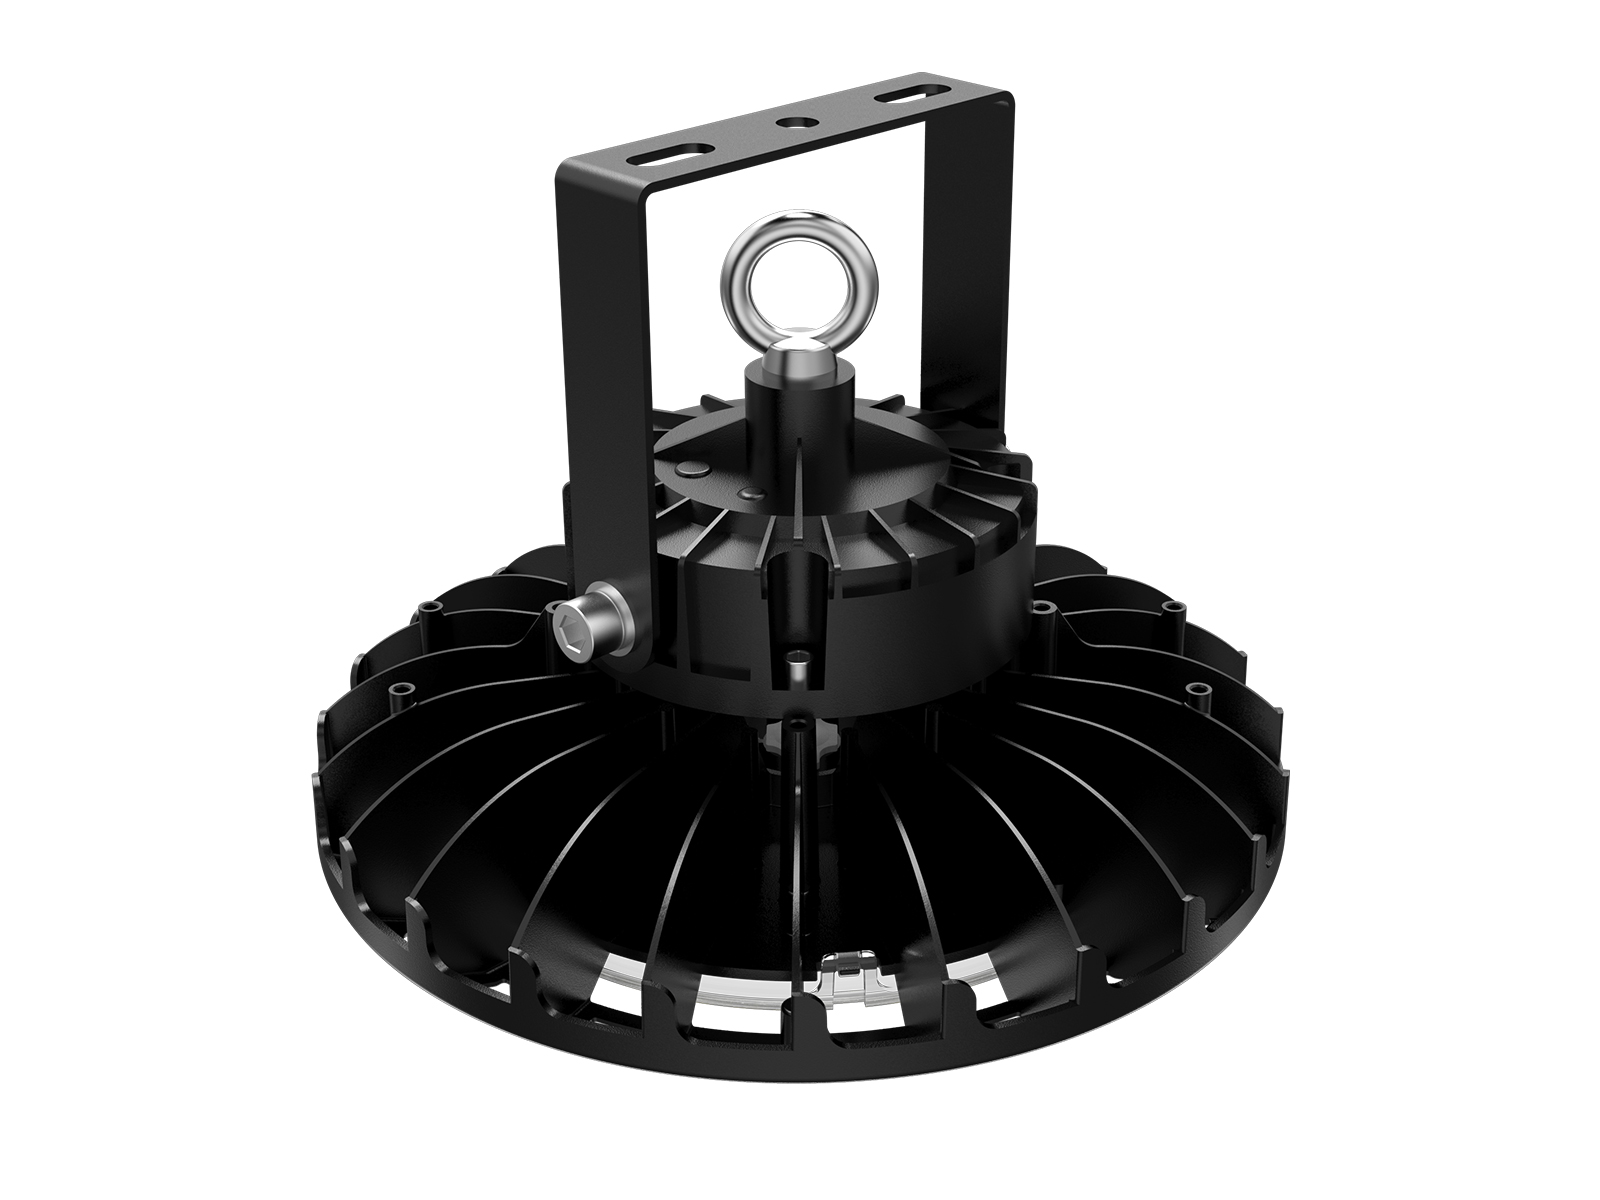 HB30 HiRise highbay 400W HID replacement